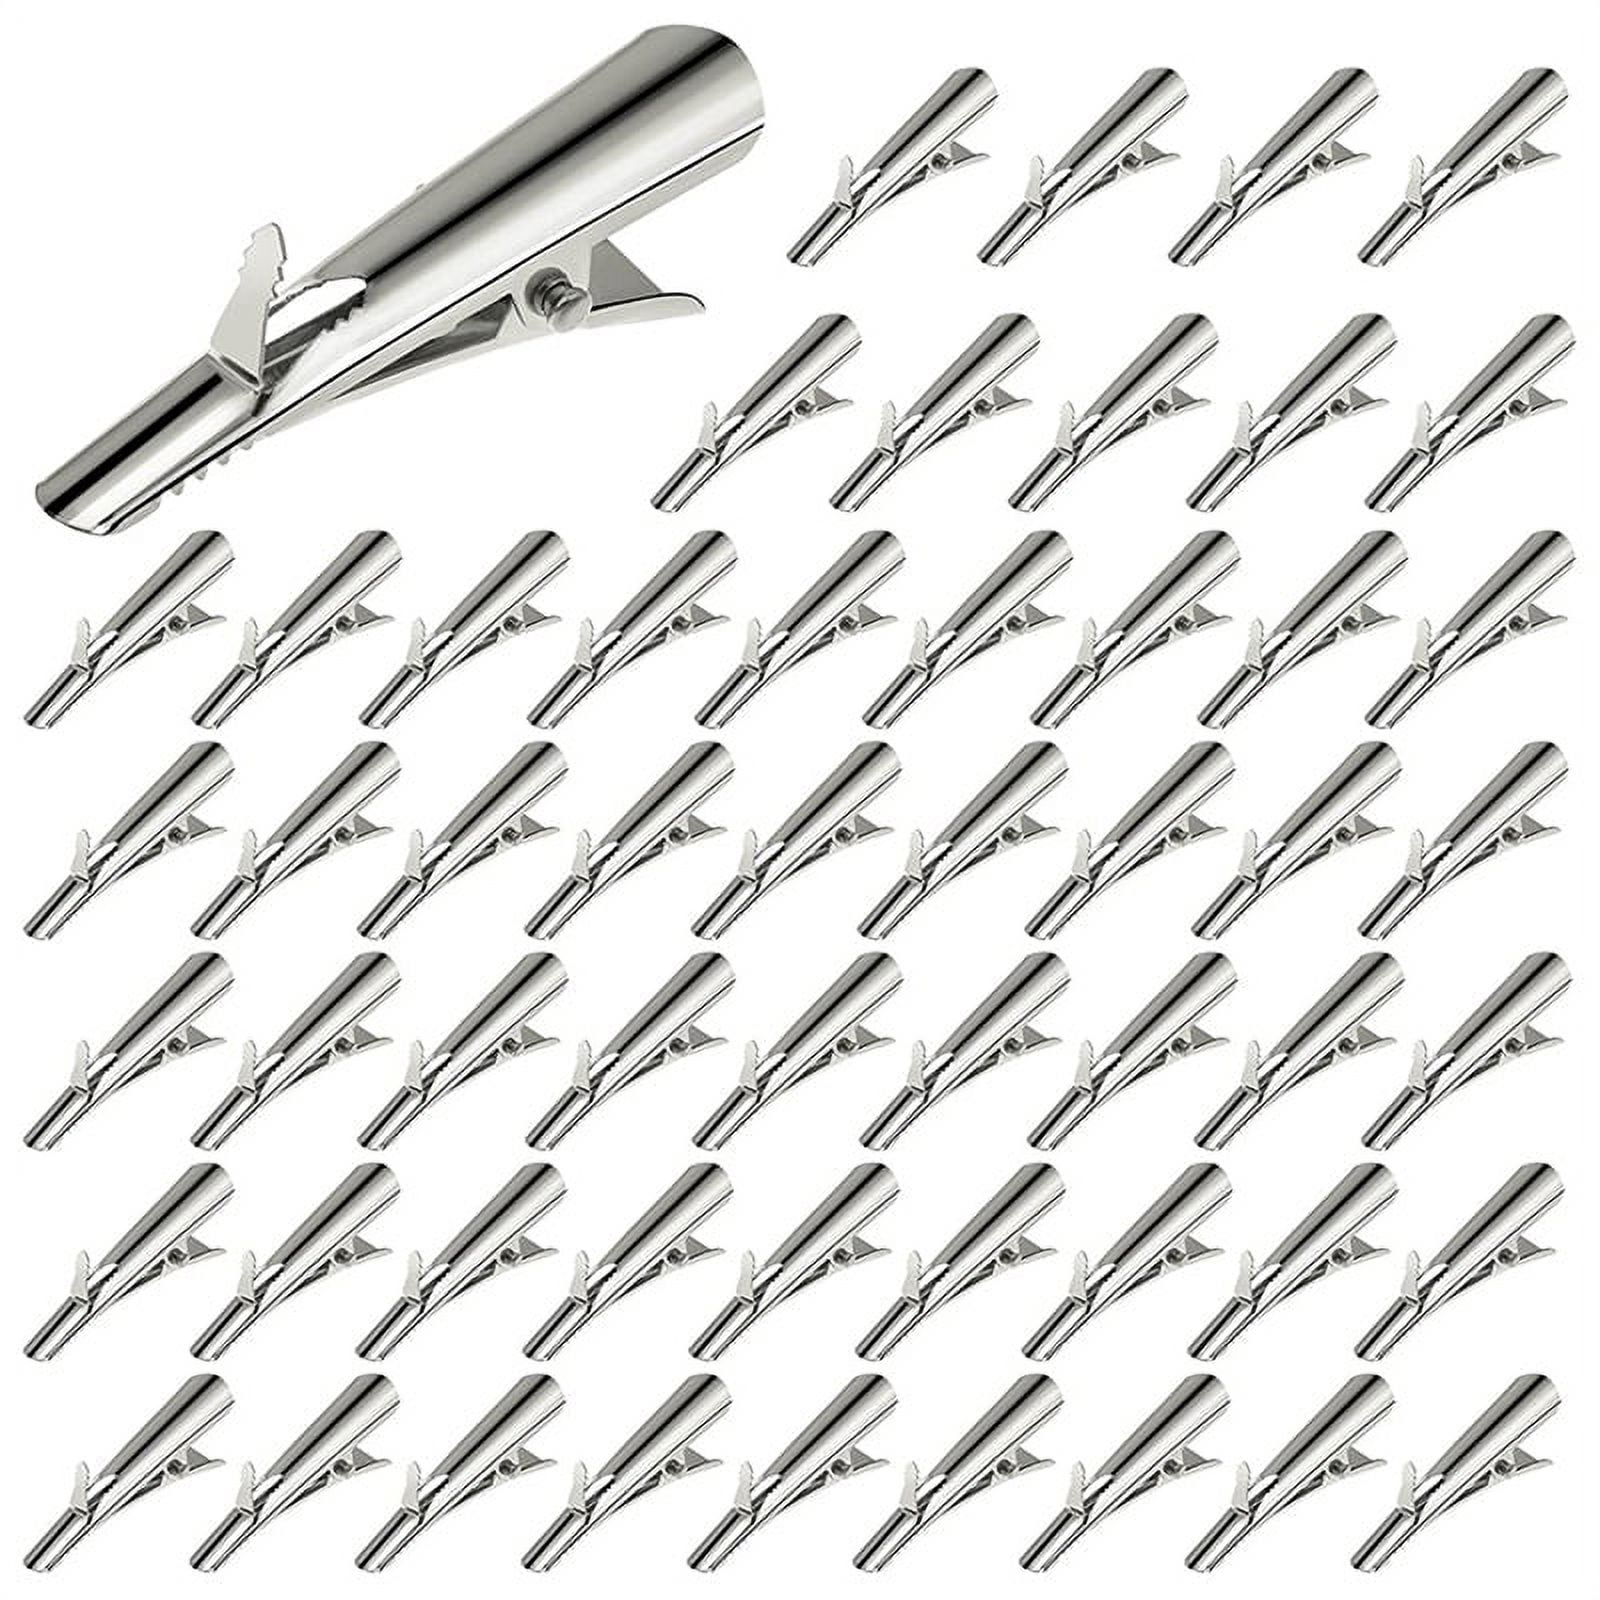 PCFVRKA 100-Pcs Mini Metal Alligator Clips for Crafts - Small Roach Clips  Spring Clips 45mm Alligator Hair Clips 